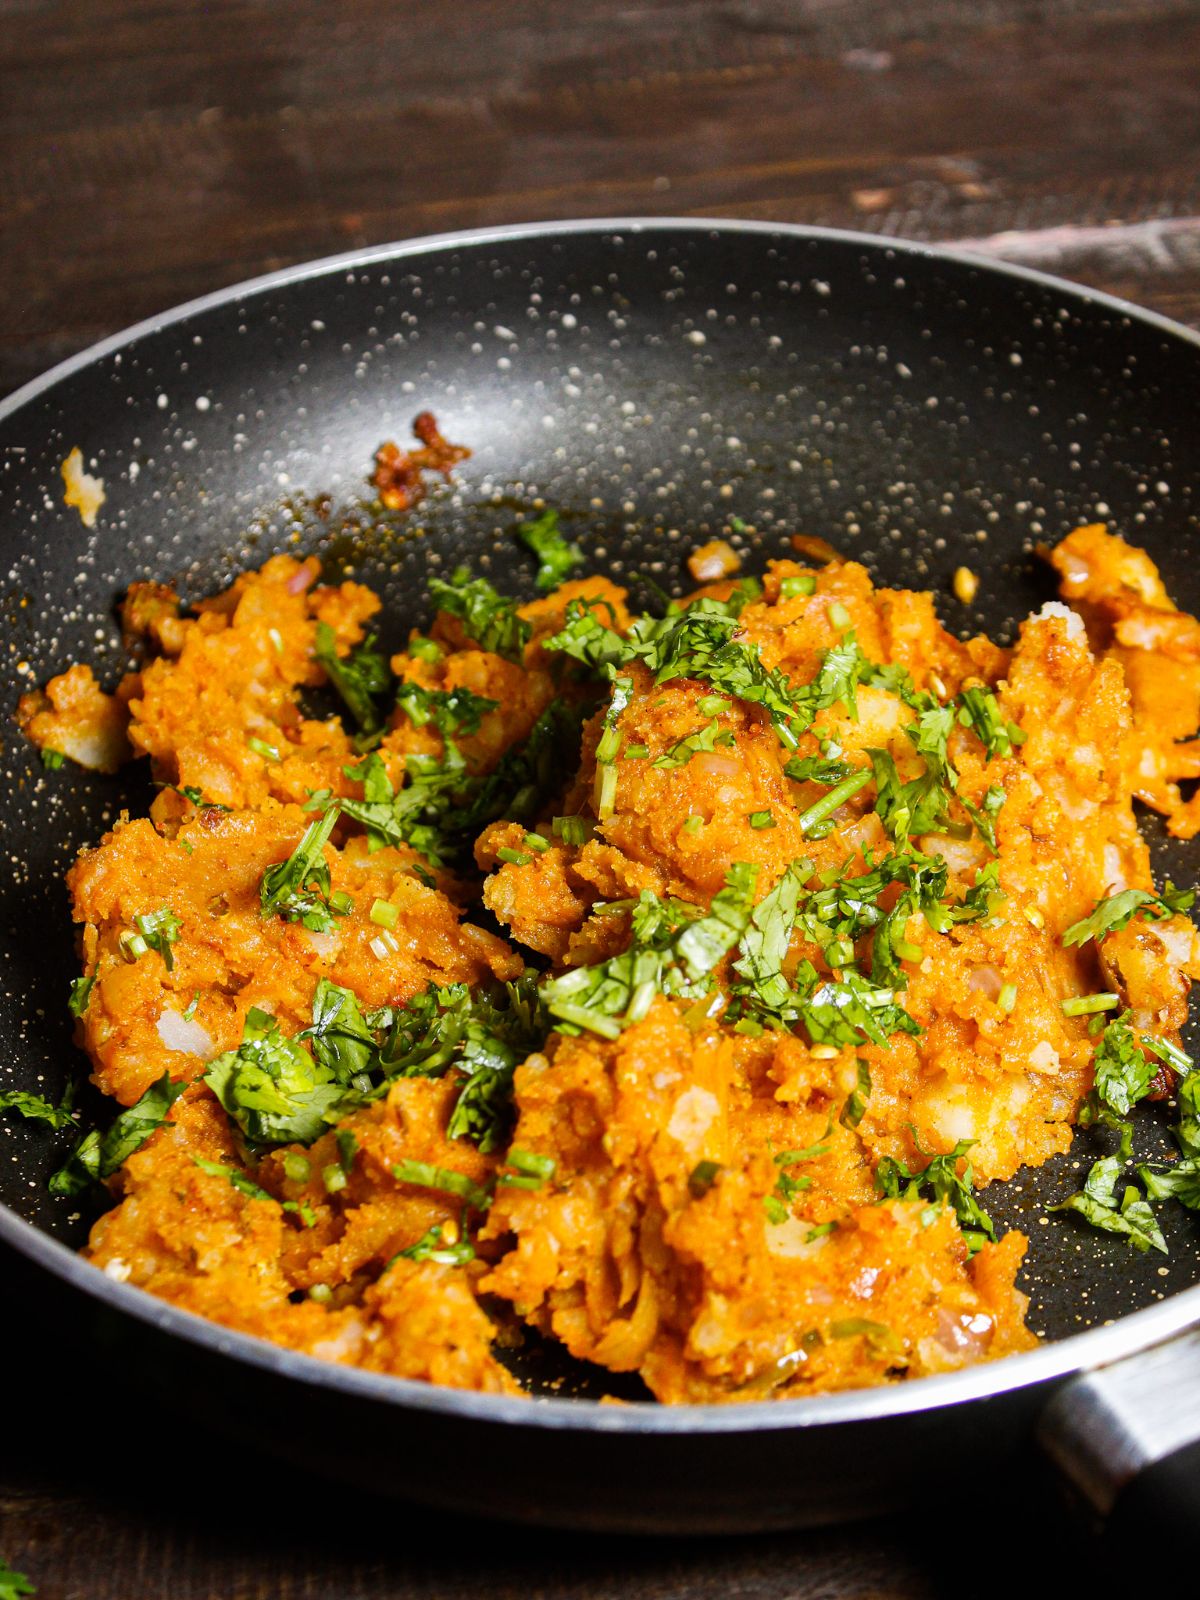 Mix well everything from the pan and garnish with fresh coriander leaves 